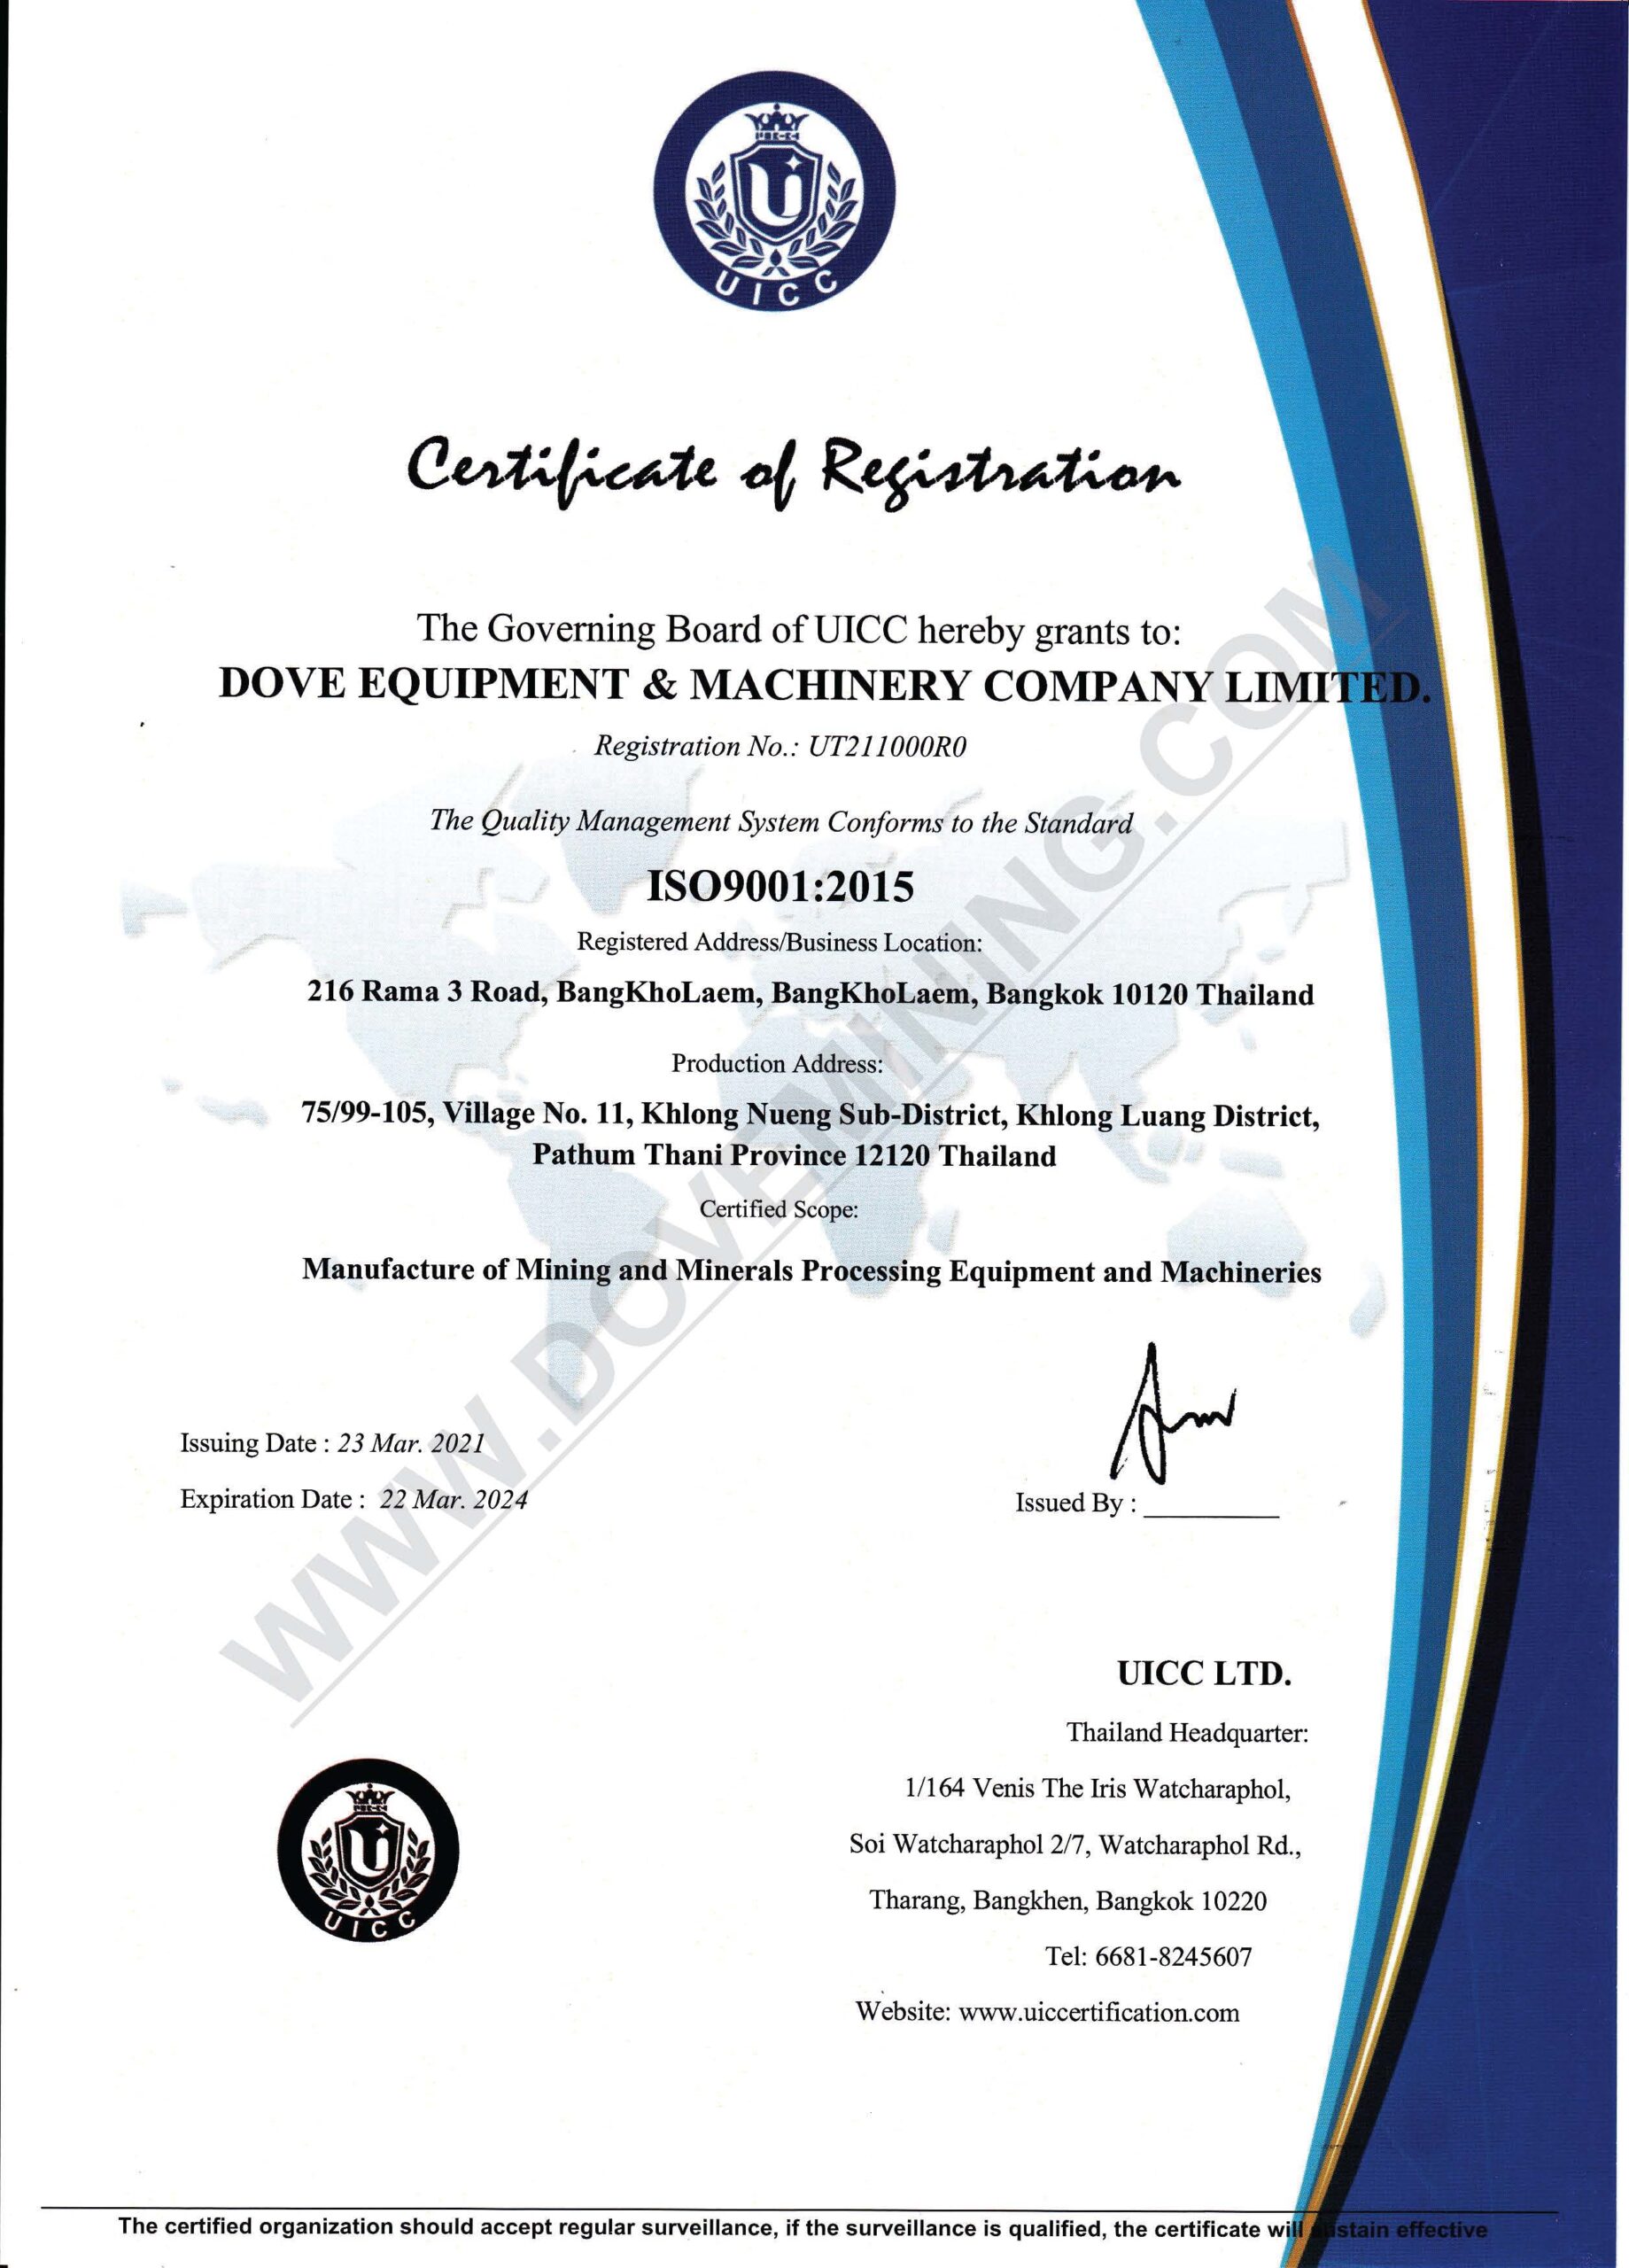 DOVE Equipment and Machinery ISO9001-2015 Certificate copy